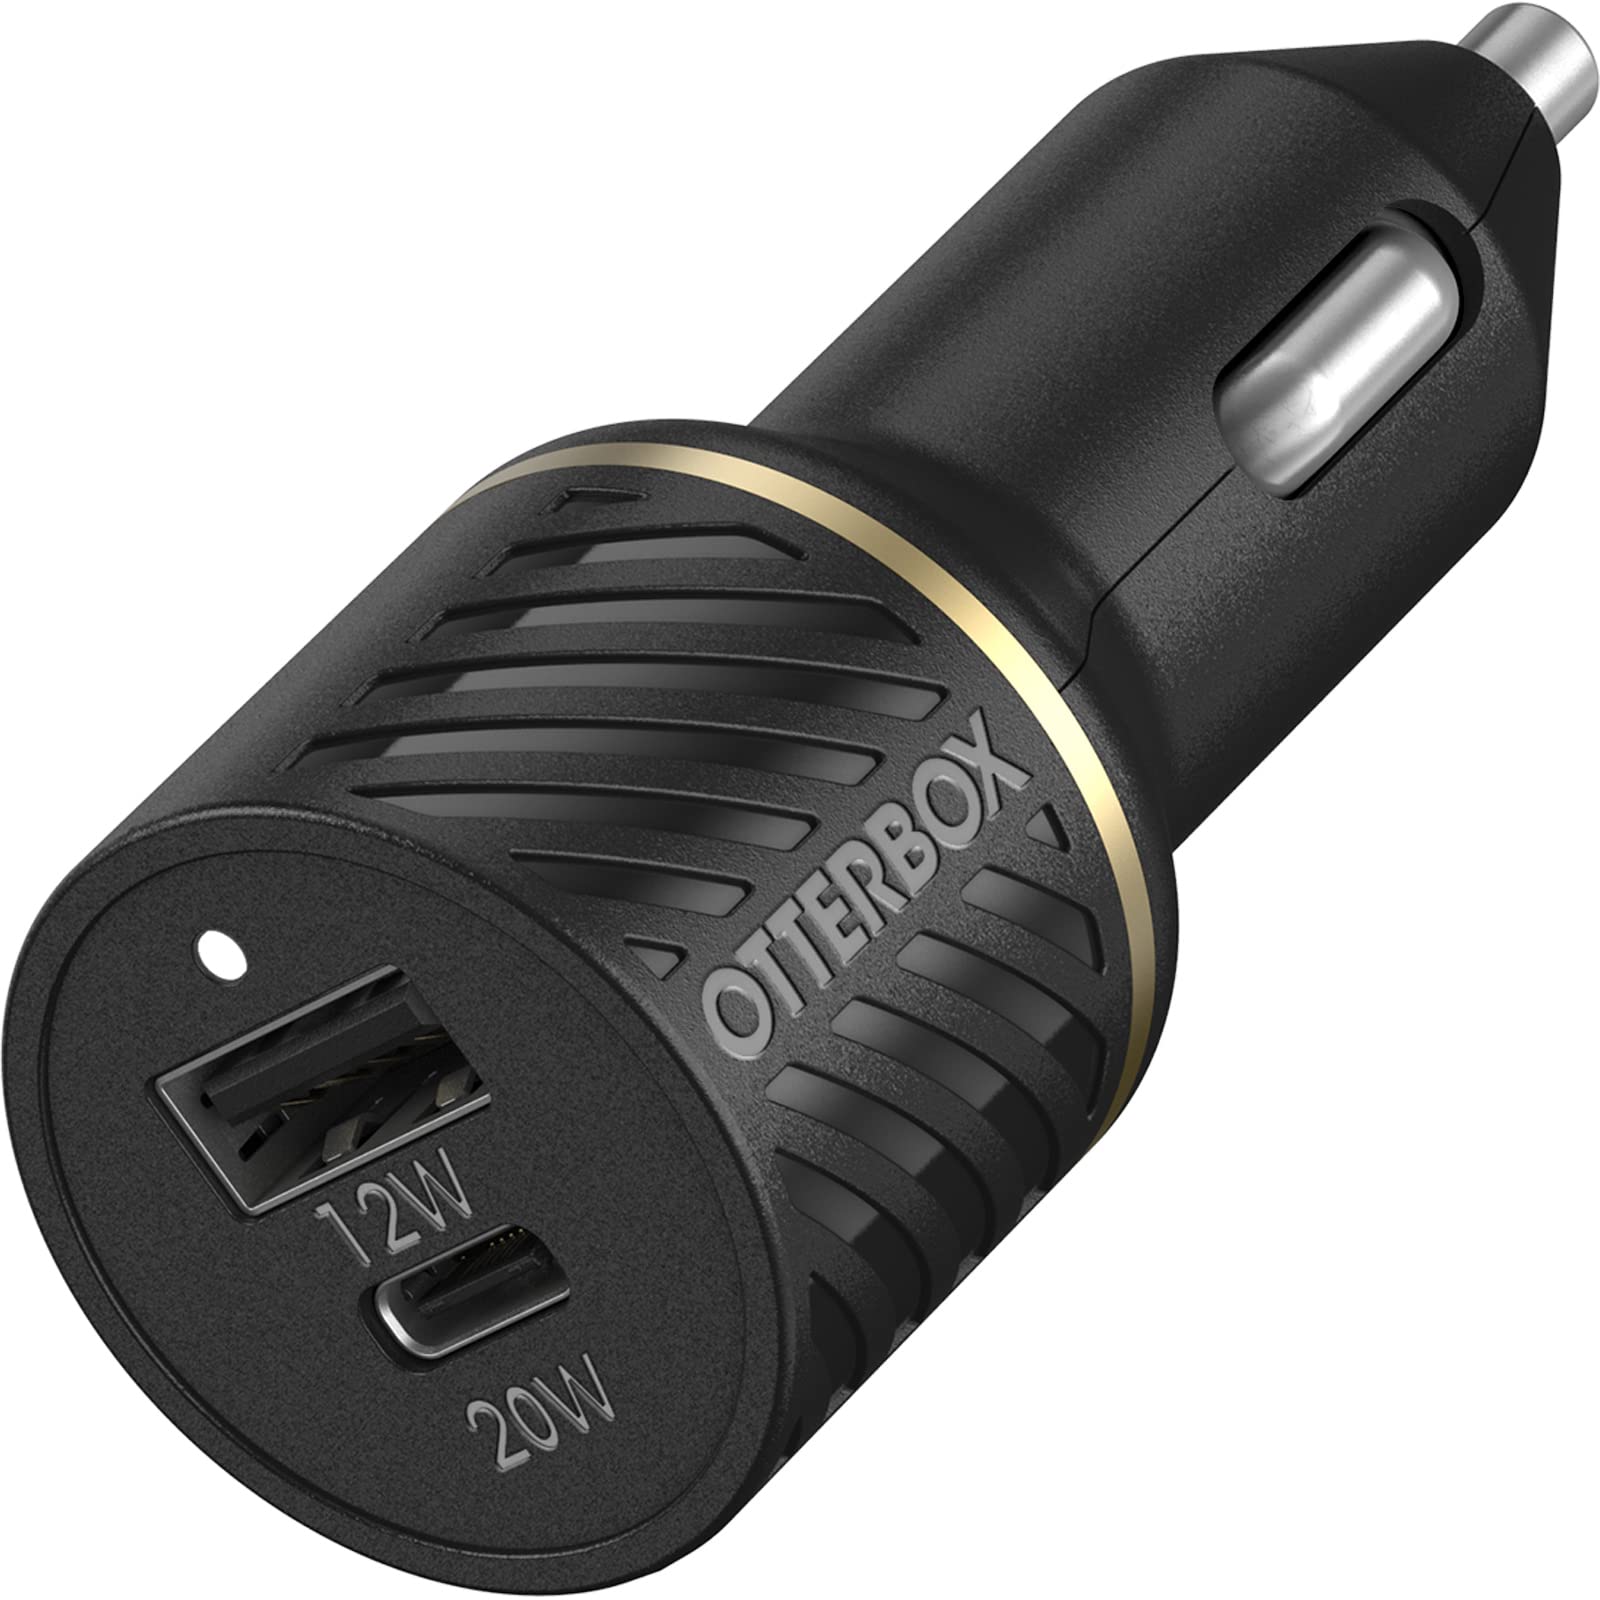 OtterBox USB-C Fast Charge Dual Port Car Charger, 50W Combined - BLACK